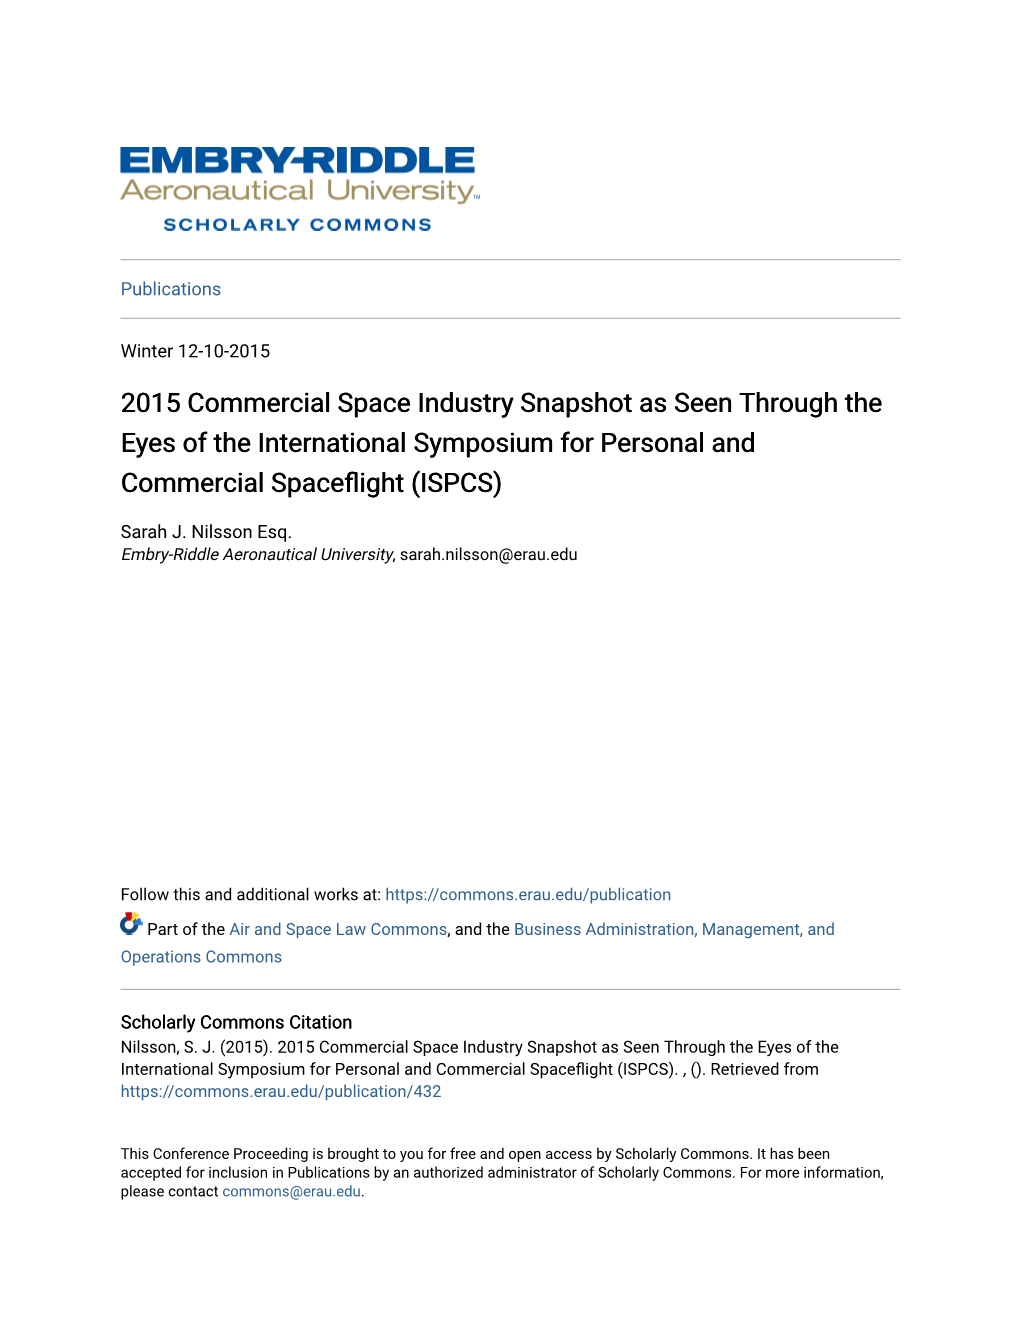 2015 Commercial Space Industry Snapshot As Seen Through the Eyes of the International Symposium for Personal and Commercial Spaceflight (ISPCS)